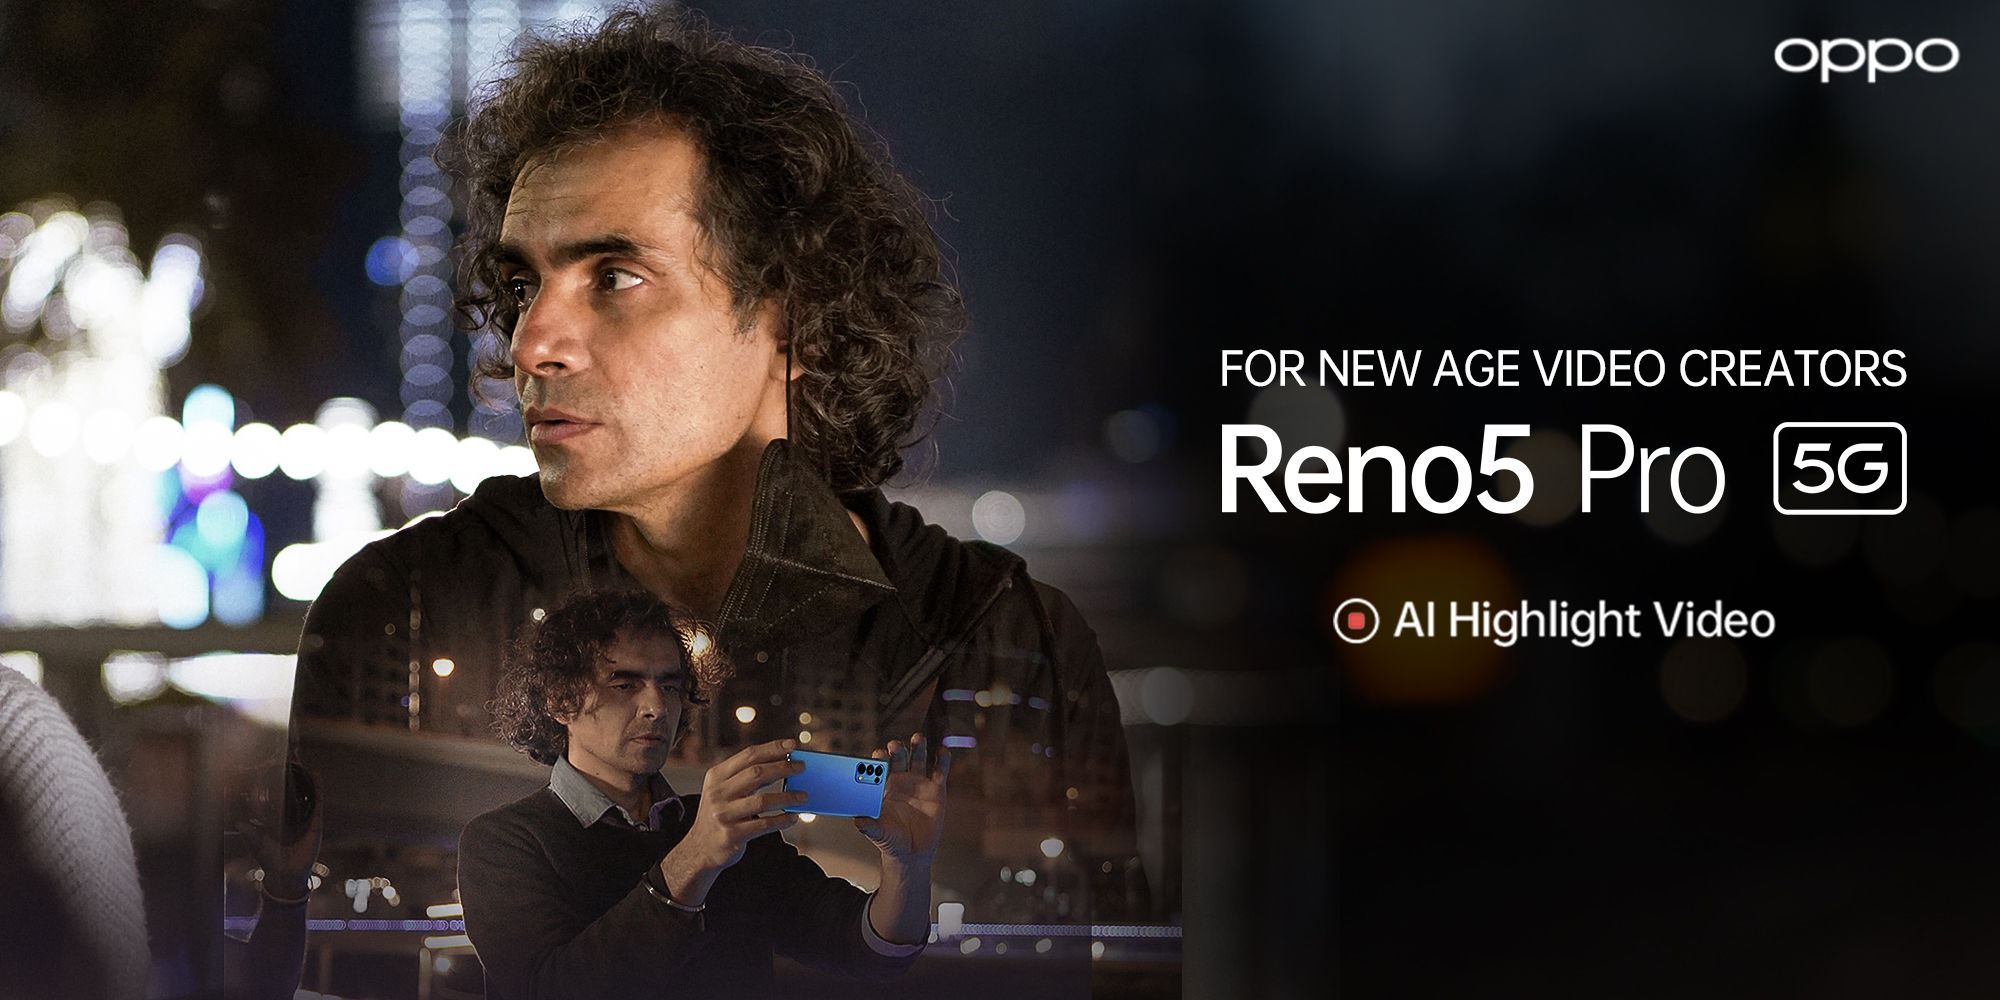 OPPO Reno5 Pro 5G ushers in a new videography revolution with Imtiaz Ali